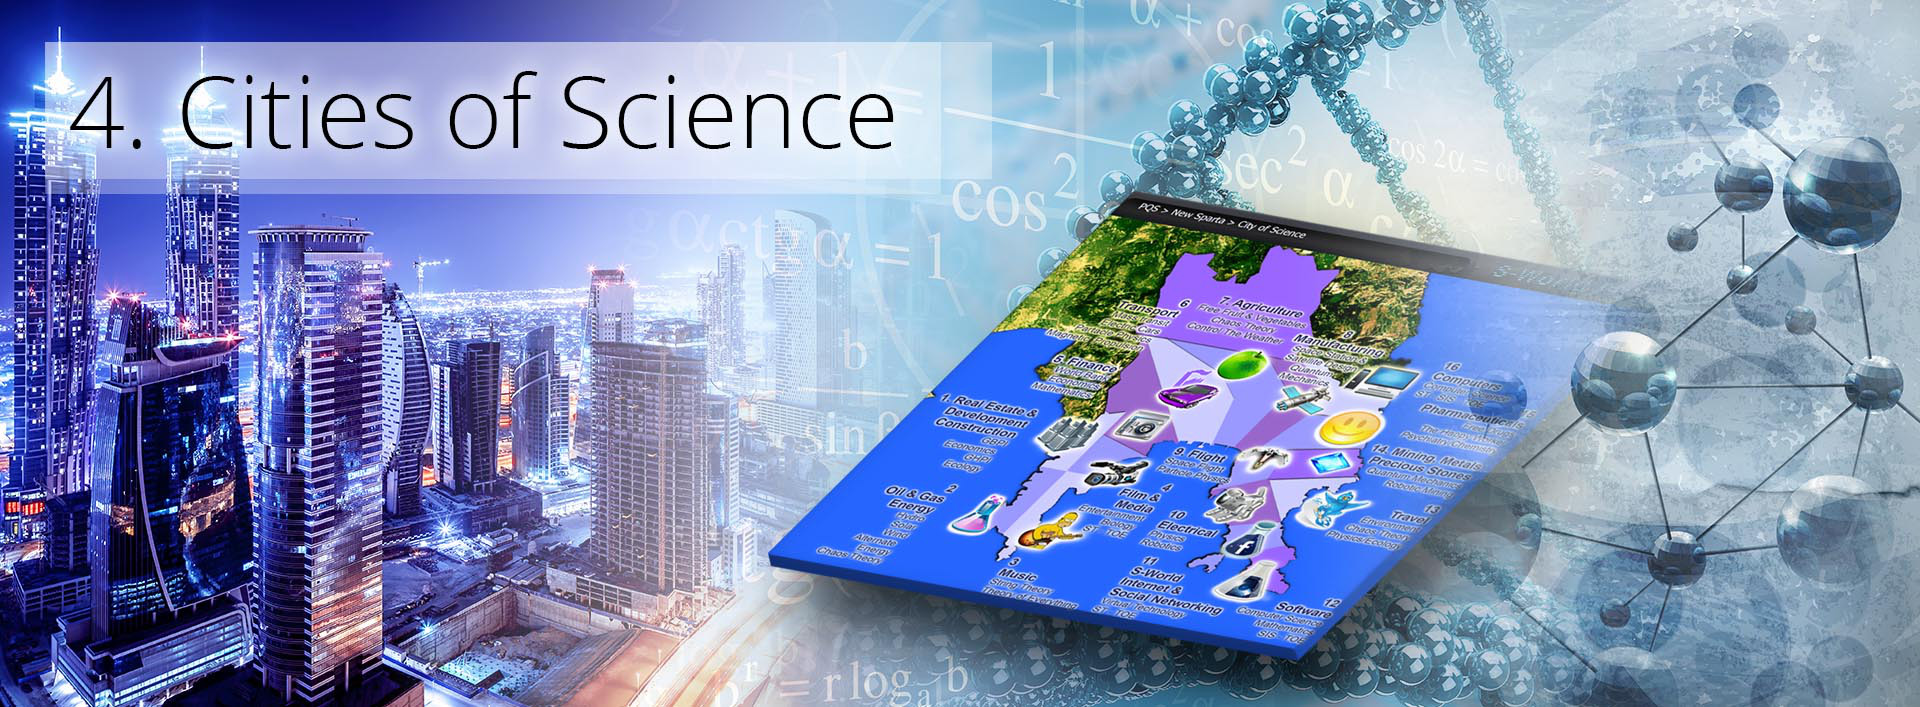 cities of science